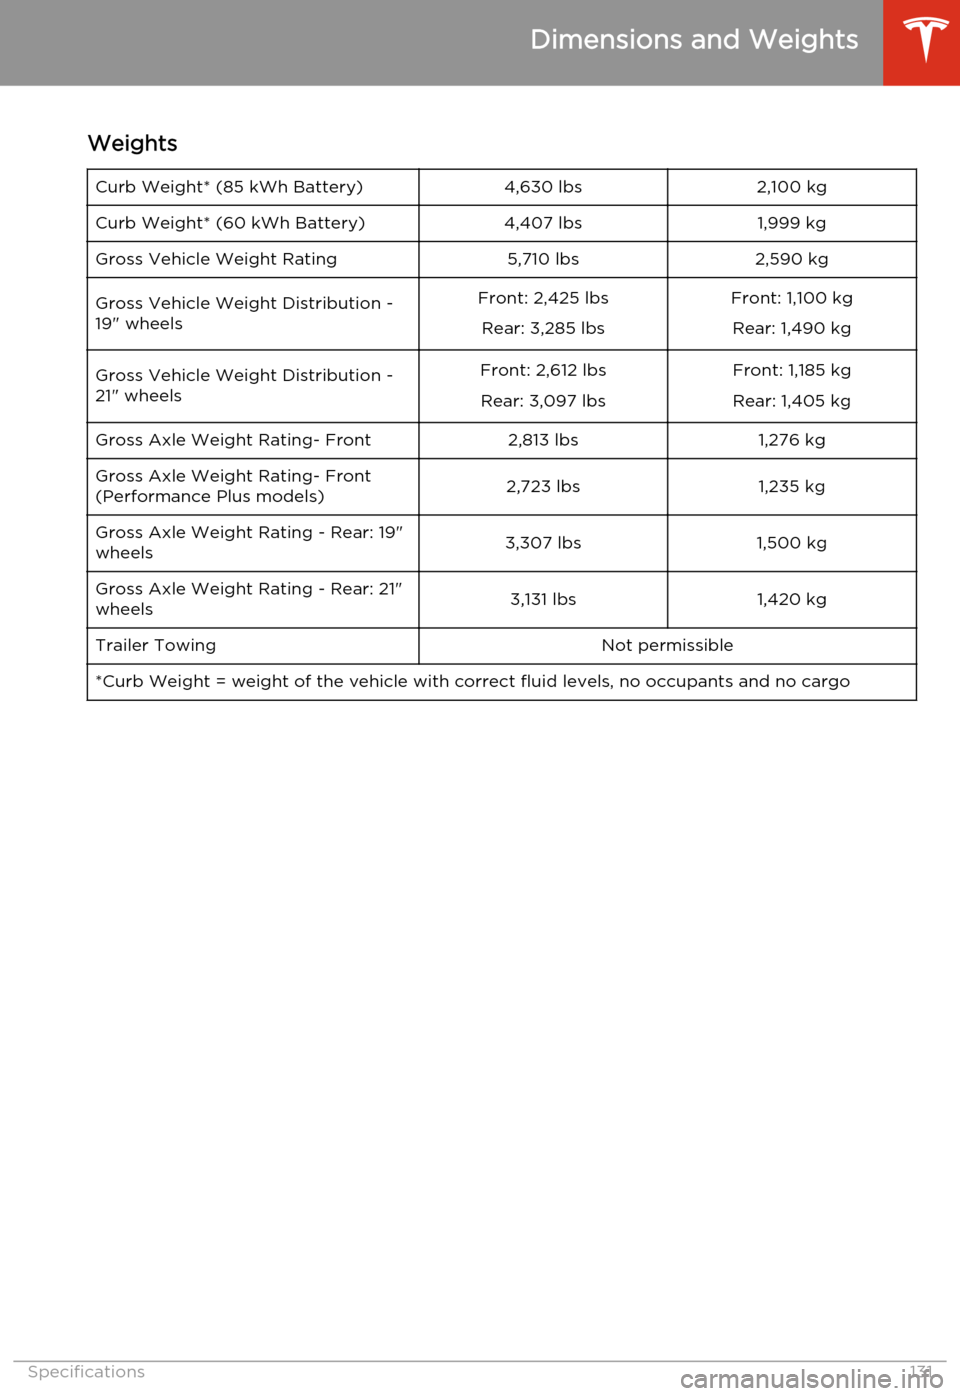 TESLA MODEL S 2014  Owners manual (North America) WeightsCurb Weight* (85 kWh Battery)4,630 lbs2,100 kgCurb Weight* (60 kWh Battery)4,407 lbs1,999 kgGross Vehicle Weight Rating5,710 lbs2,590 kgGross Vehicle Weight Distribution -
19" wheelsFront: 2,42